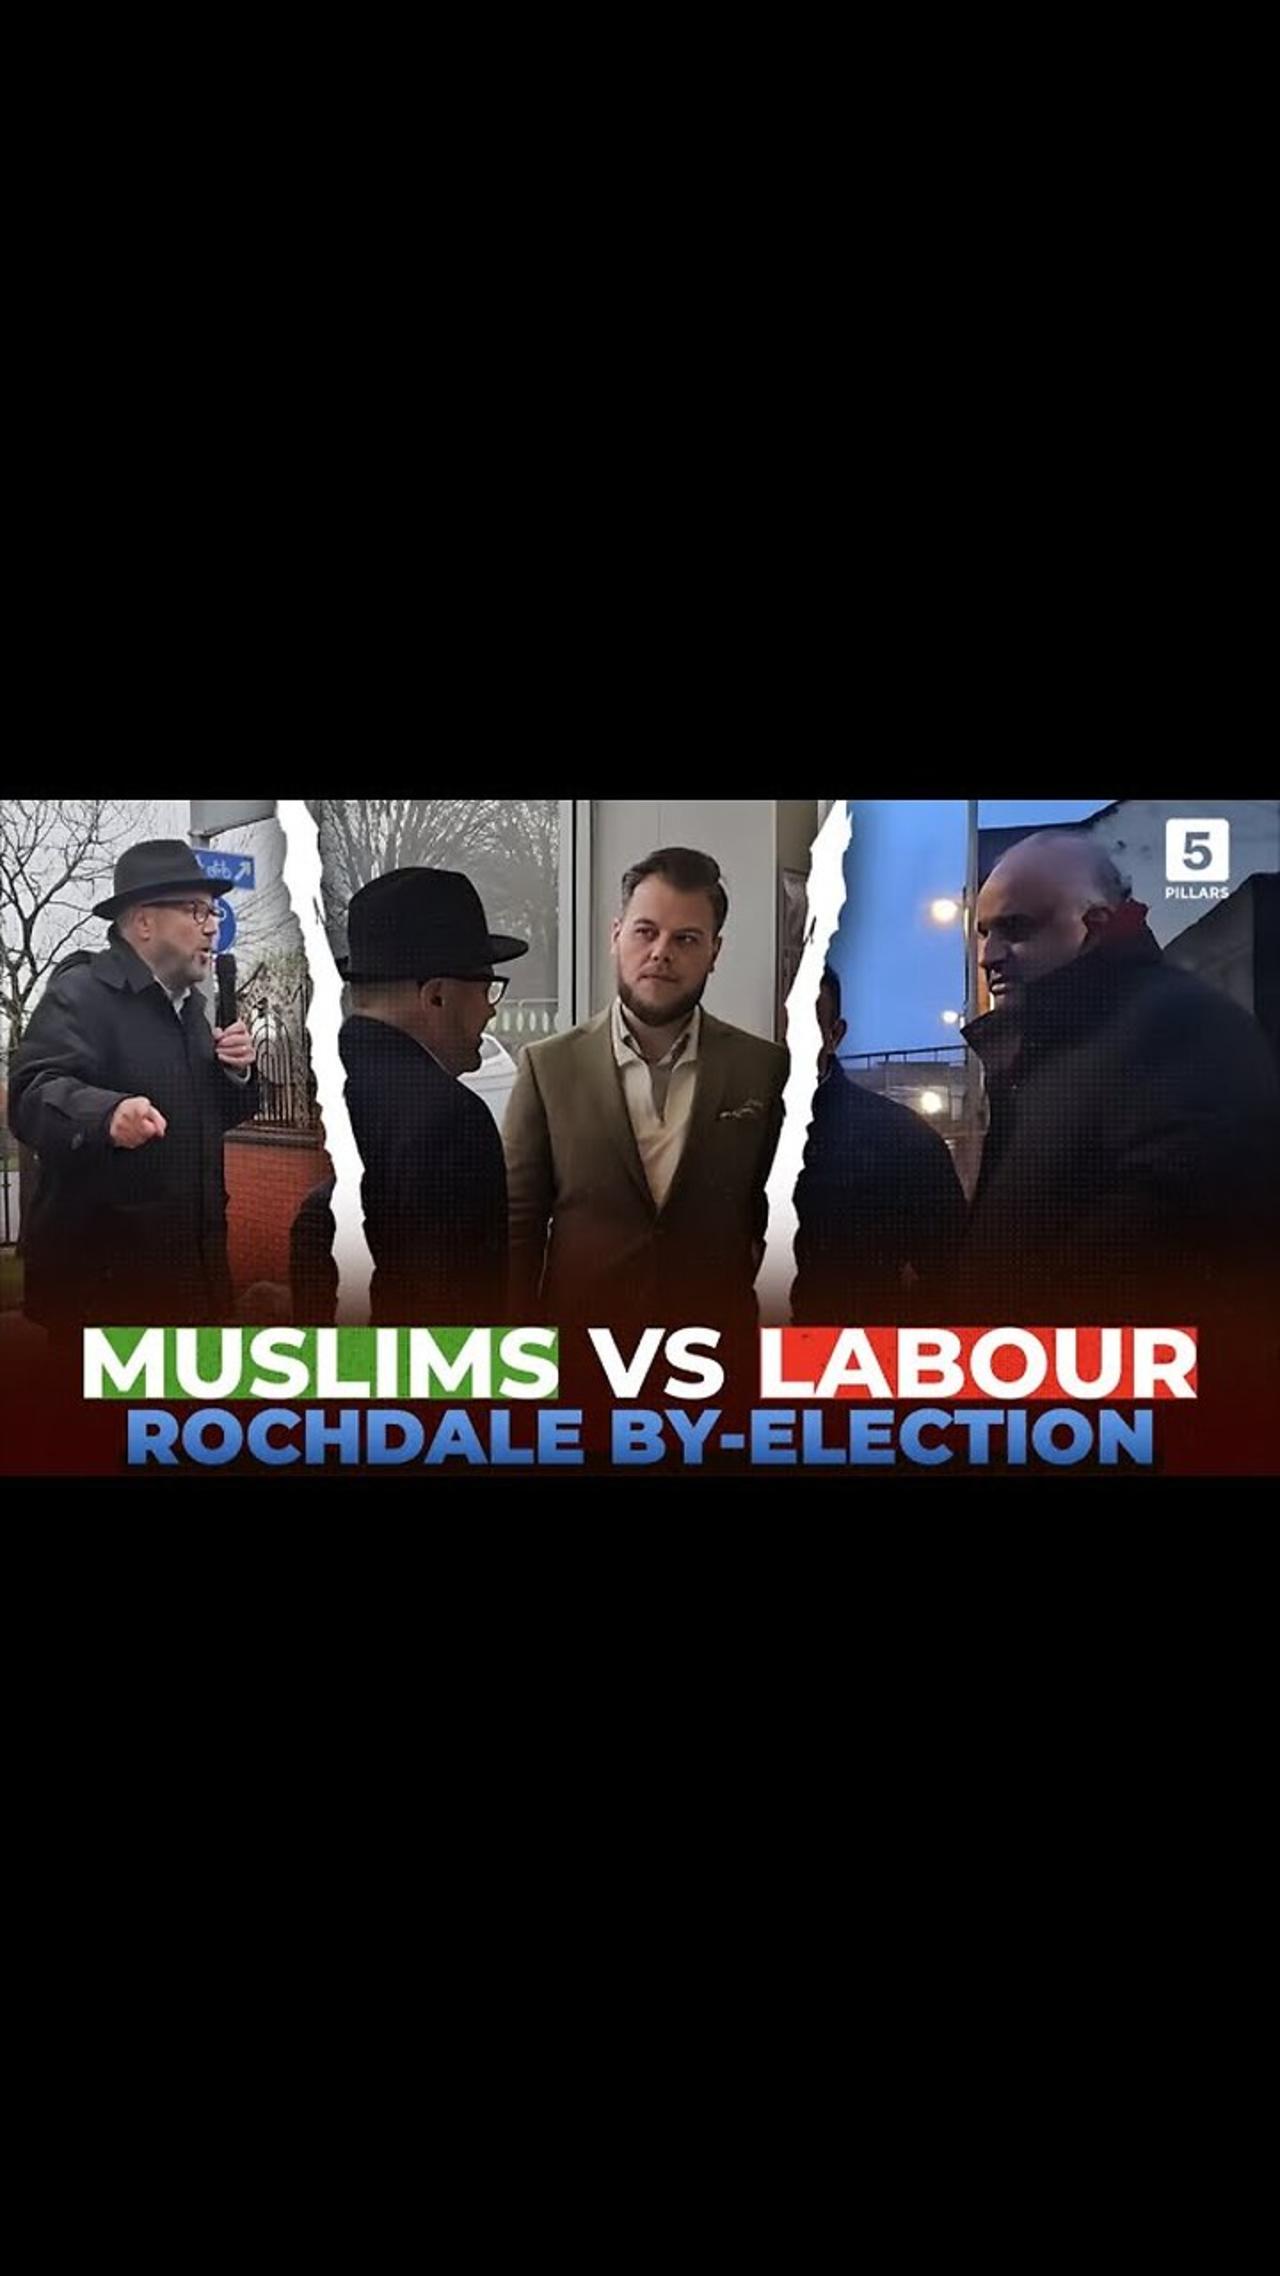 Grooming gang capital Rochdale election descendss into a circus